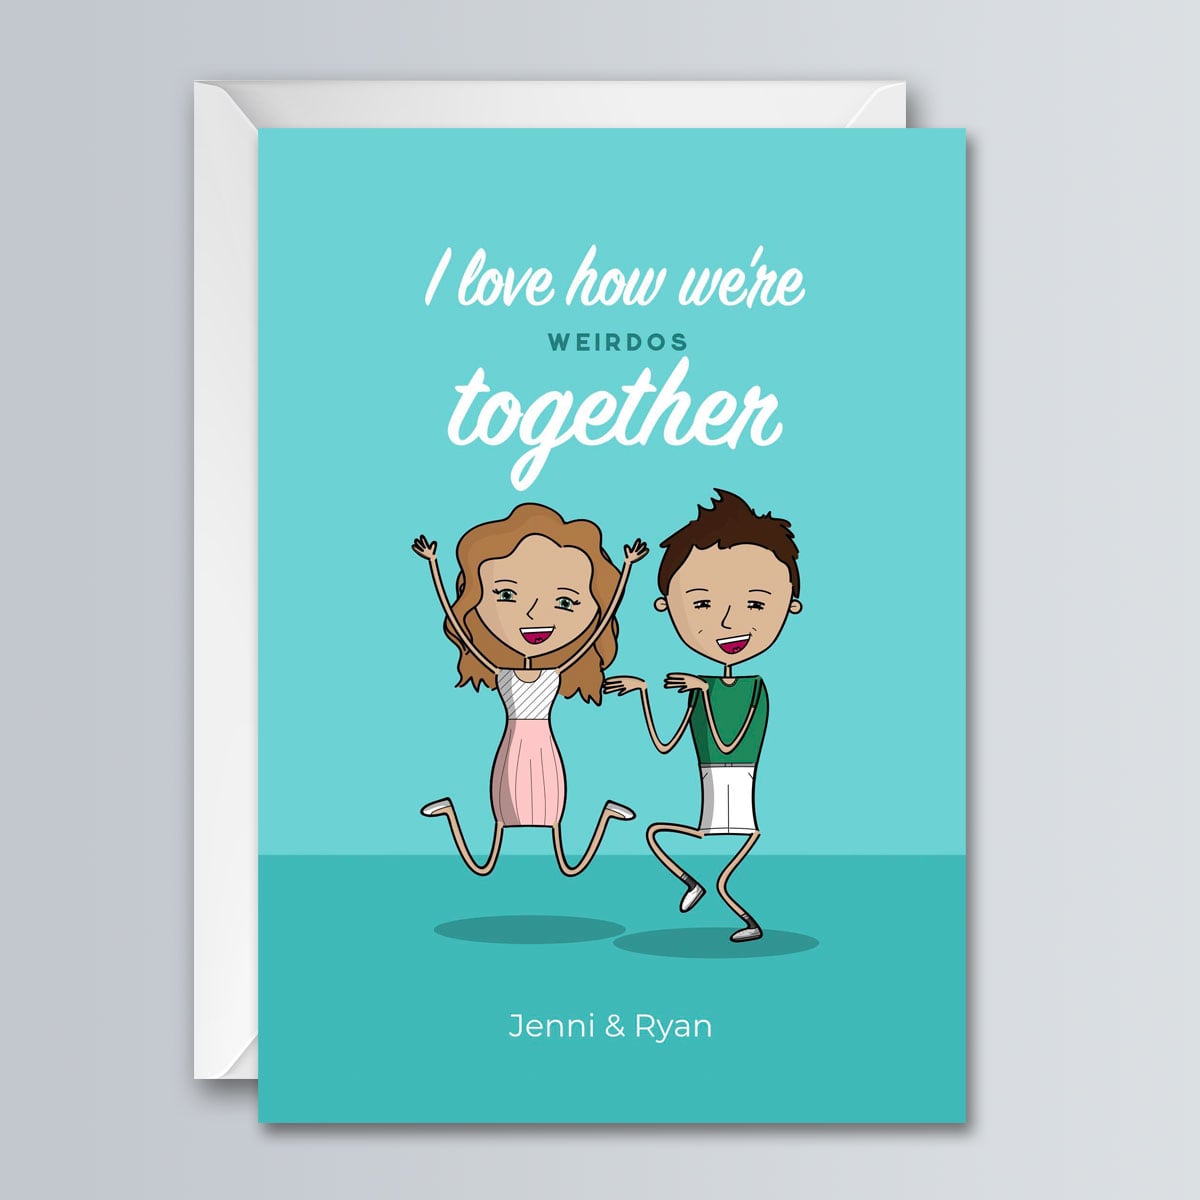 I Love How We're Weirdos Together - Greeting Card